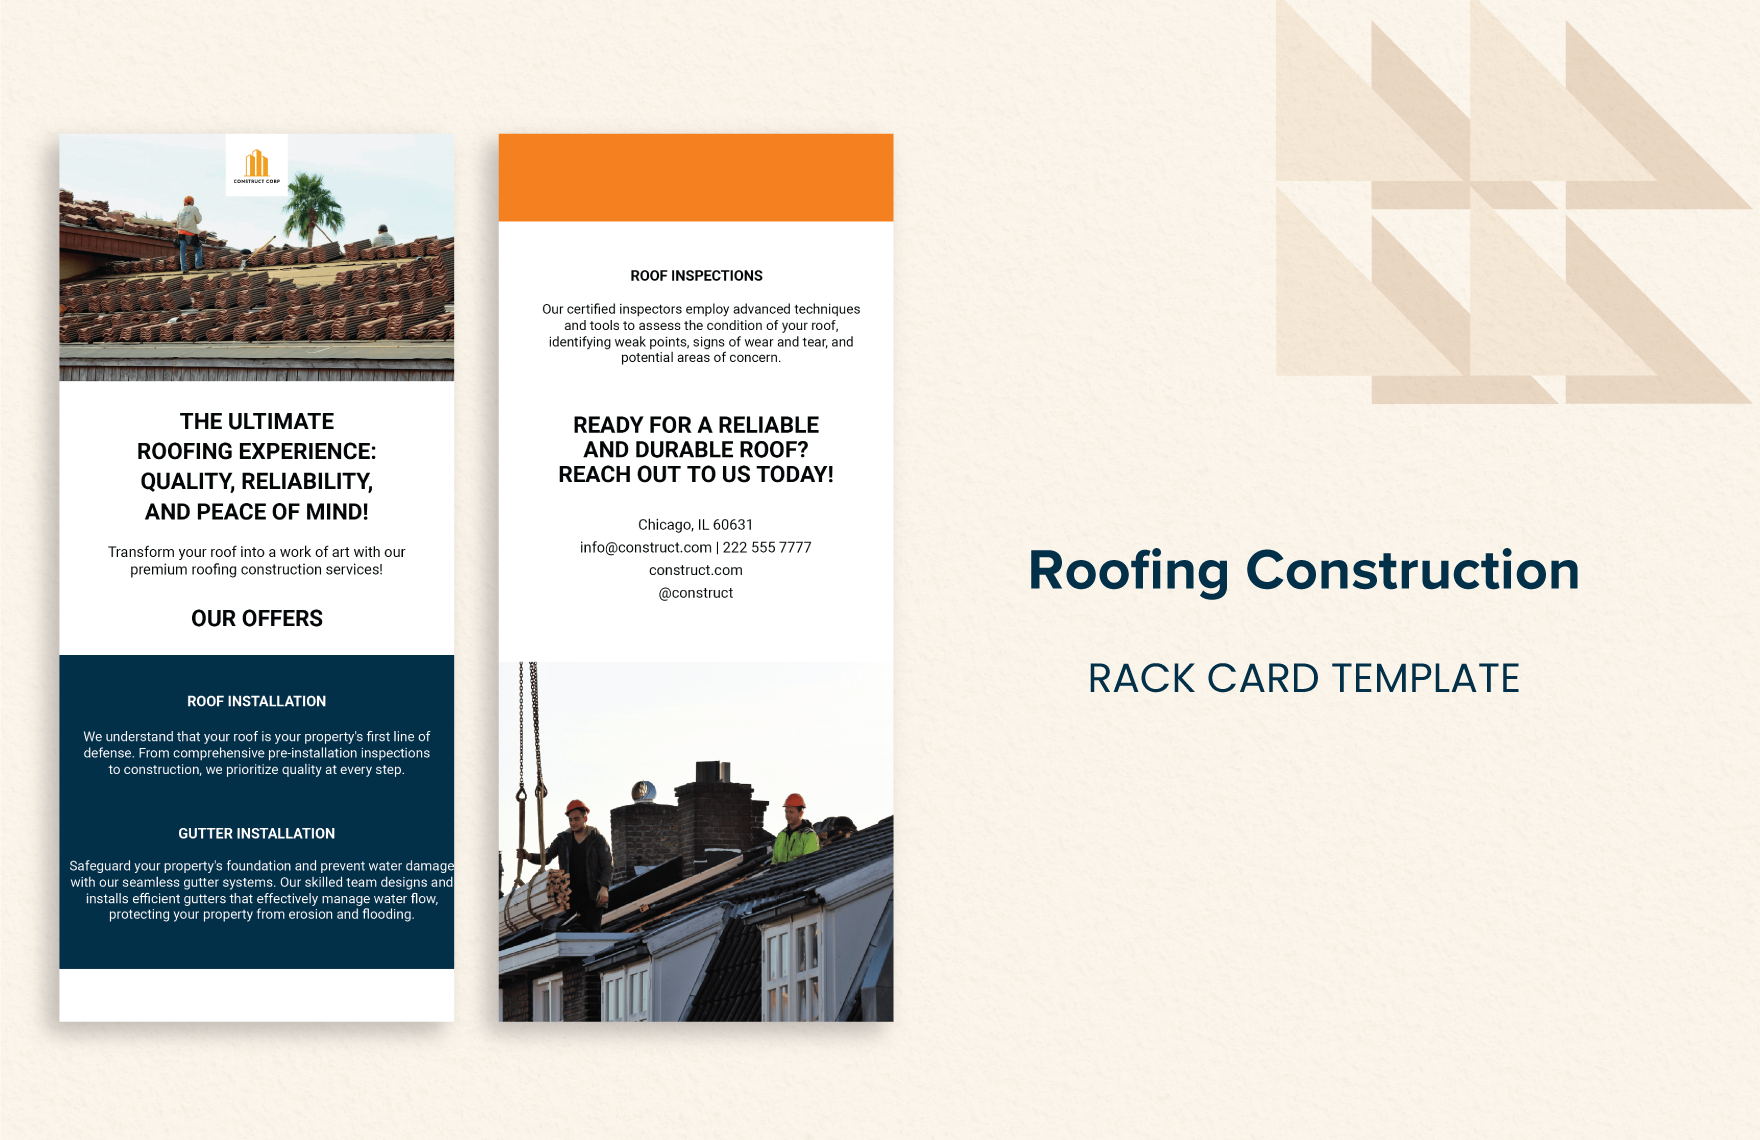 Roofing Construction Rack Card Template